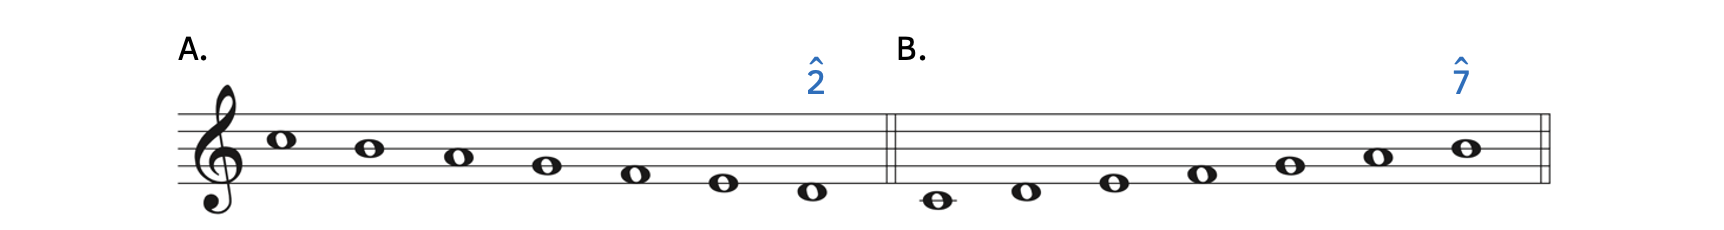 Major scales stopping before reaching tonic. Example A is a descending C major scale that stops on scale degree 2. Example B is an ascending C major scale that stops on degree 7.